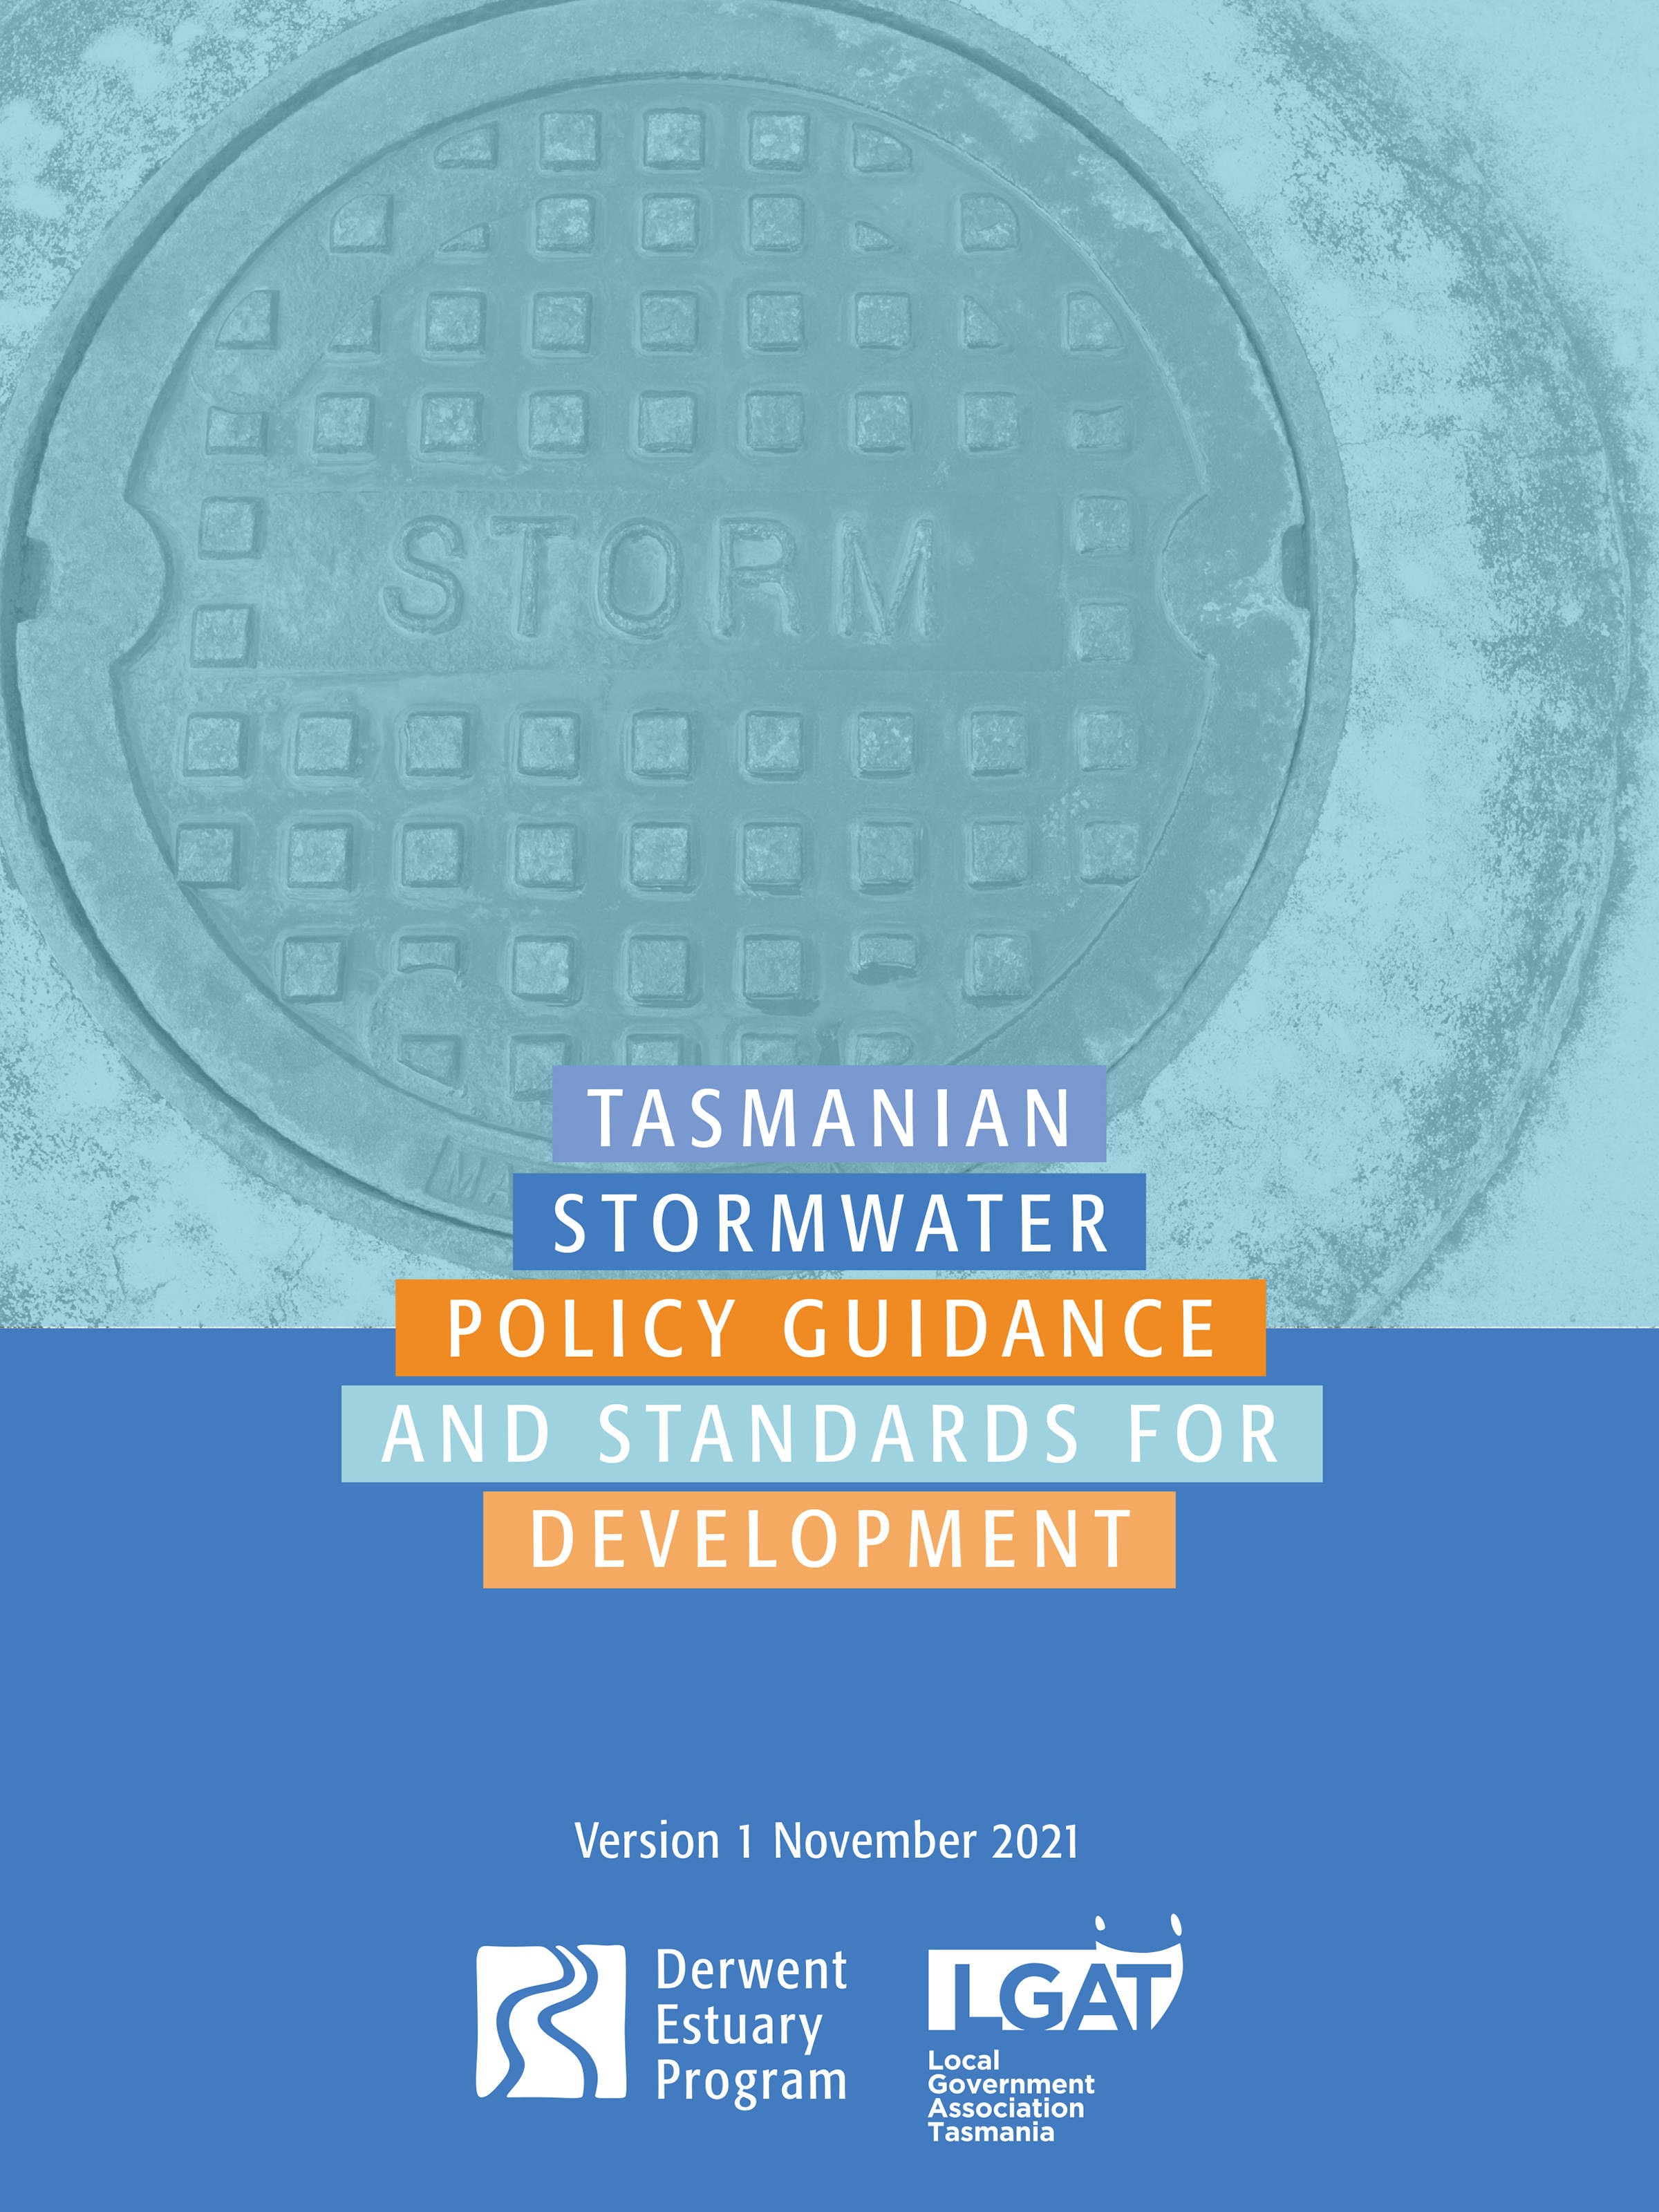 Tasmanian Stormwater Policy Guidance and Standards for Development document cover.